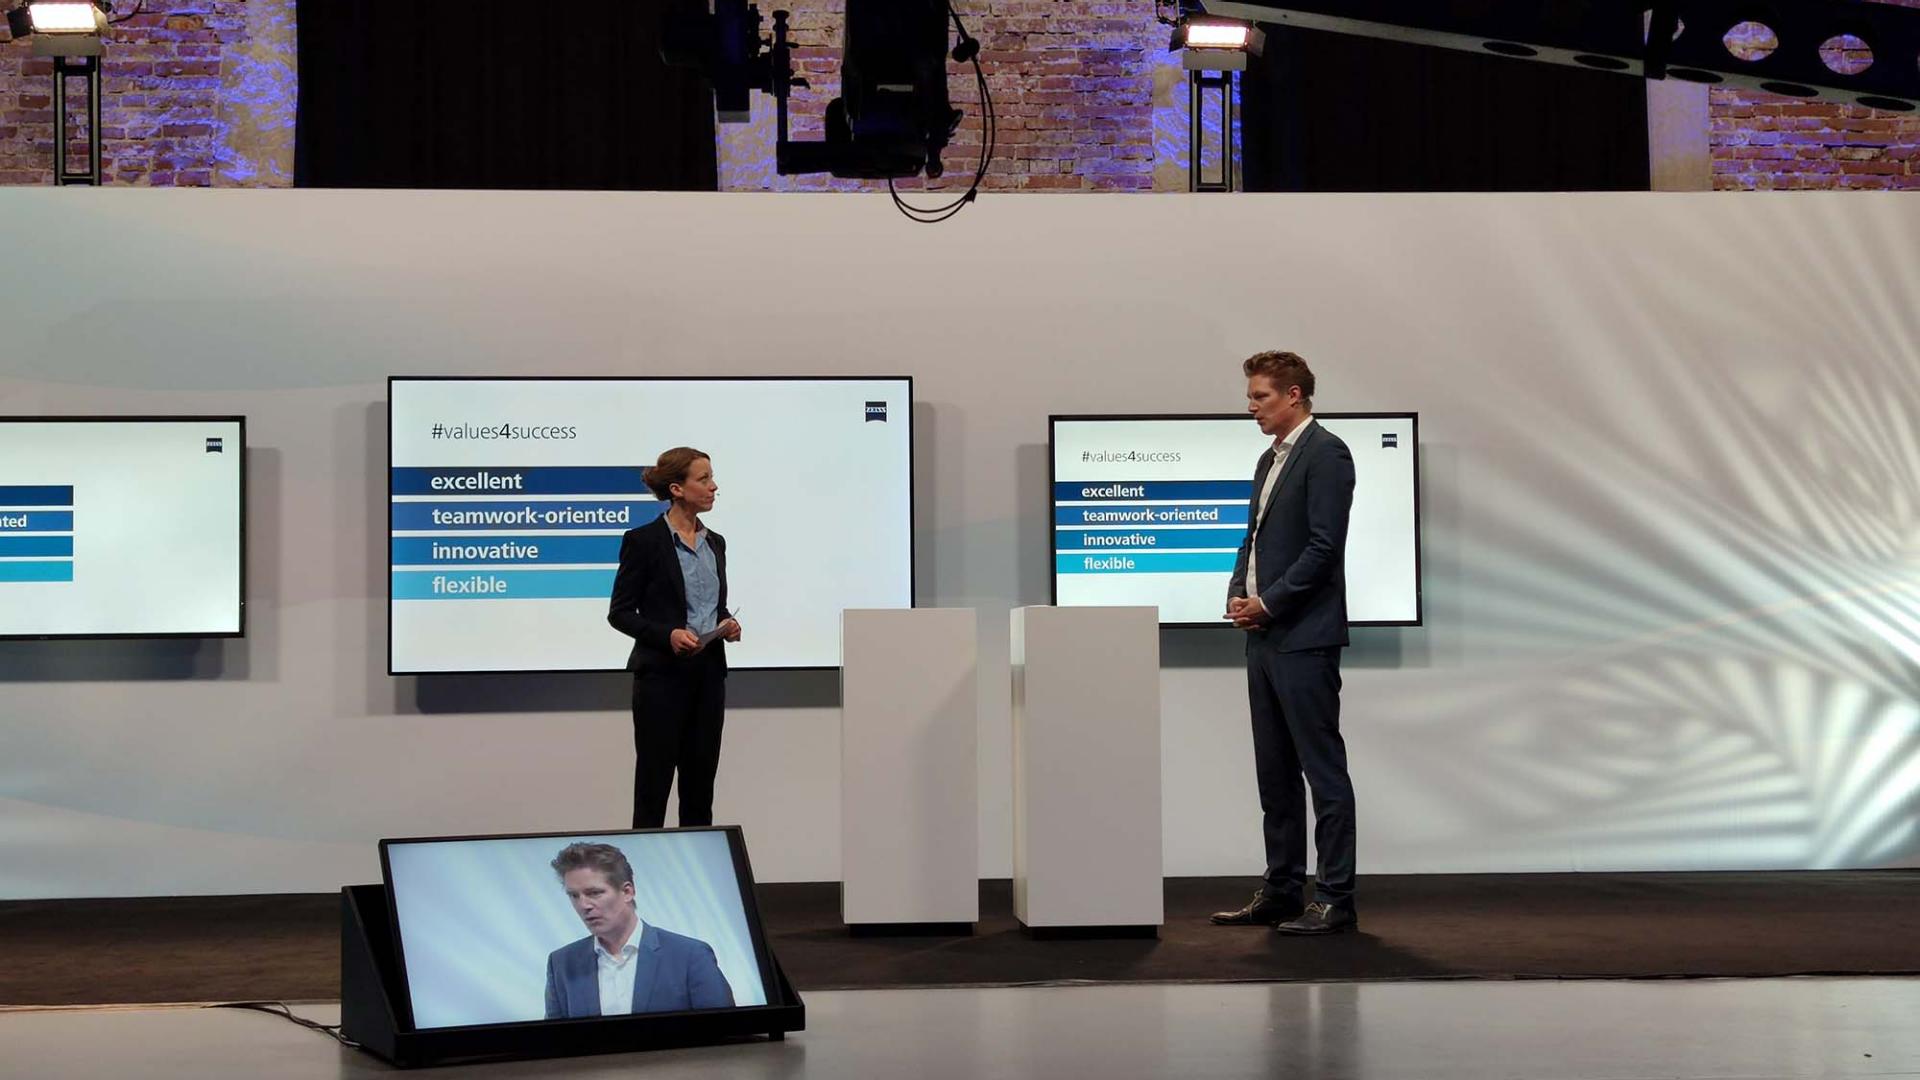 Virtual event: Suppliers' Day at ZEISS SMT with organizers on stage